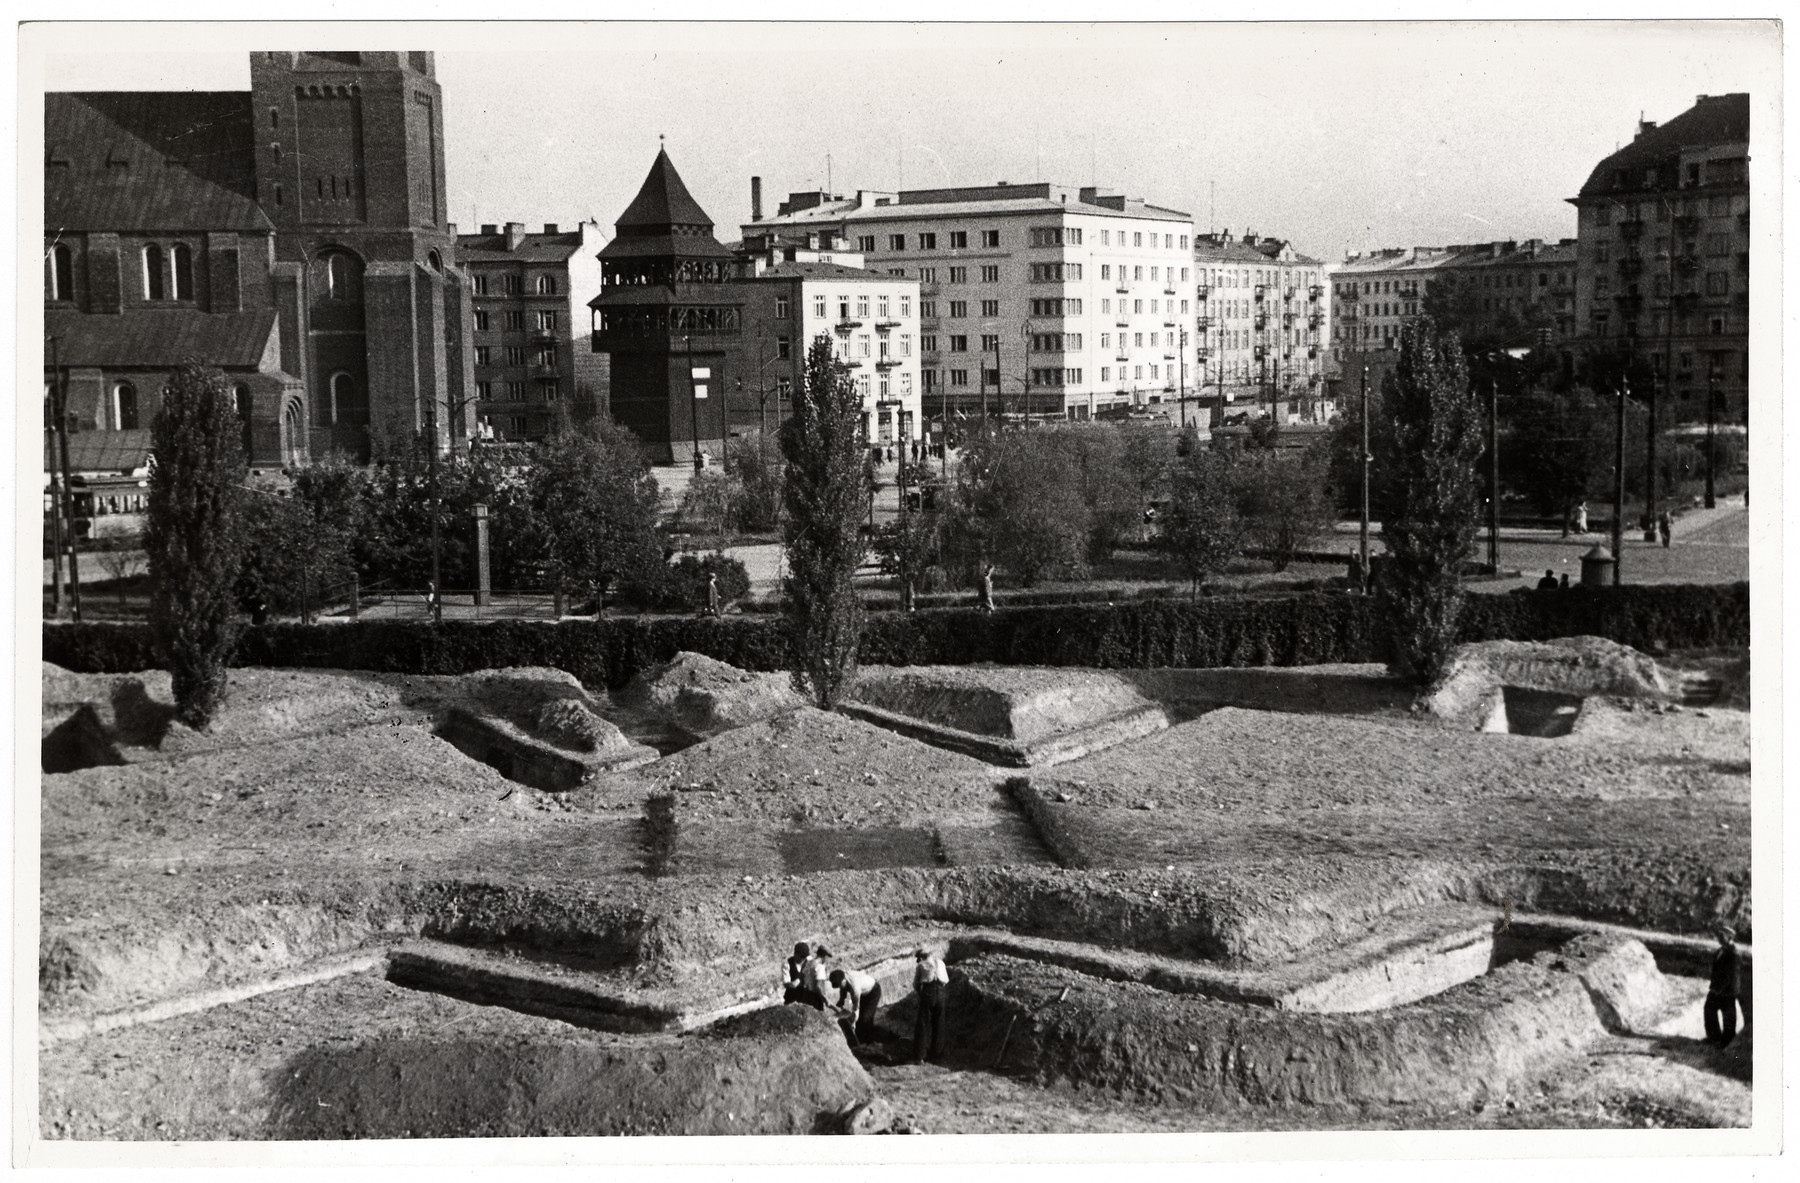 A view of the besieged city of Warsaw and the trenches dug to slow the advance of the German army.